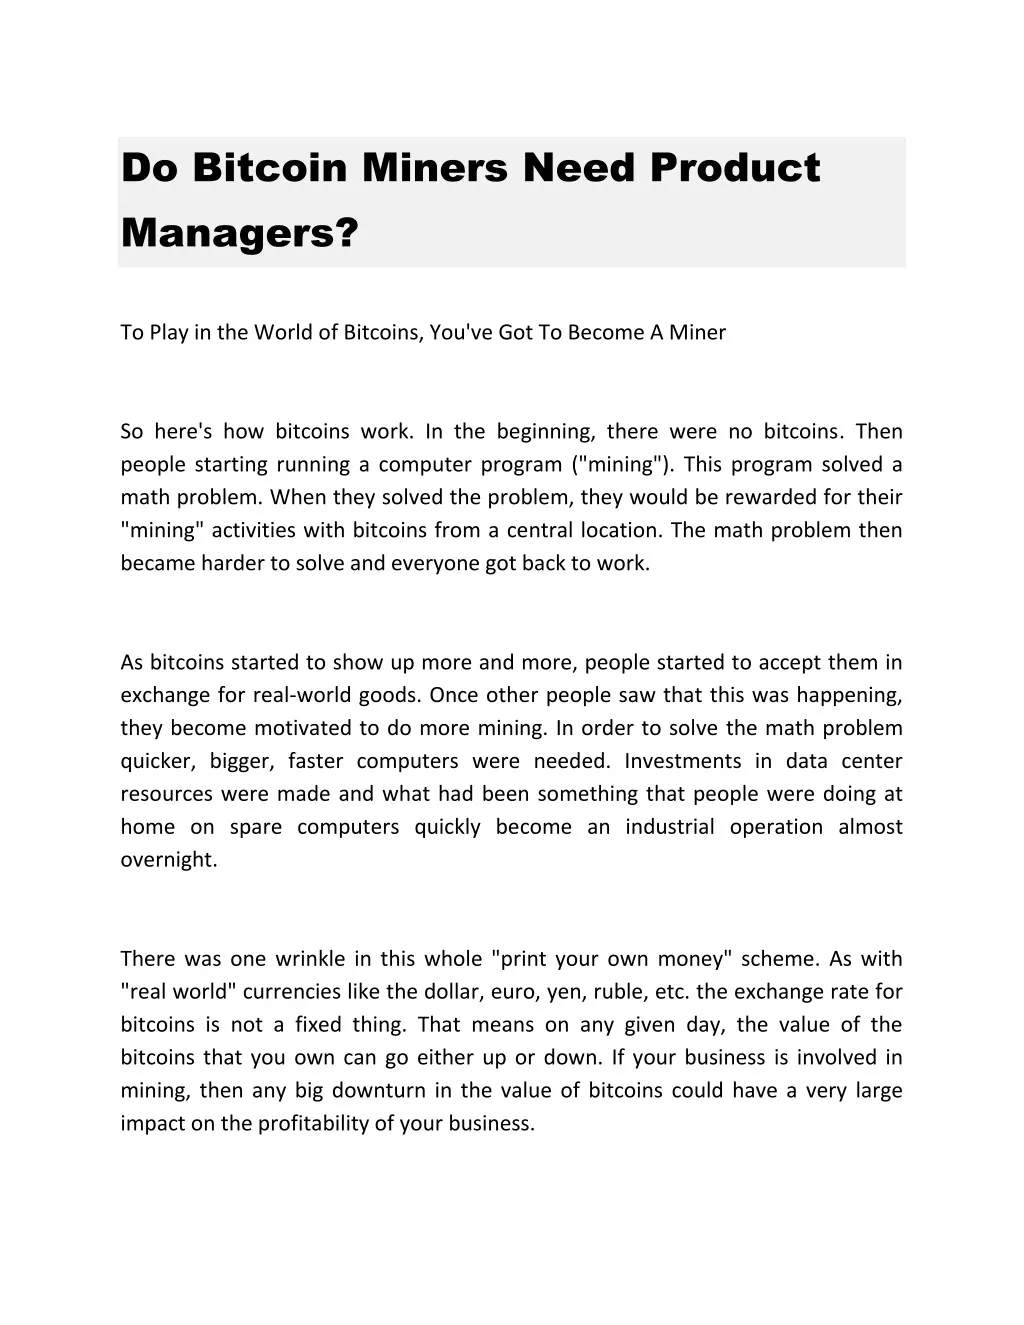 do bitcoin miners need product managers